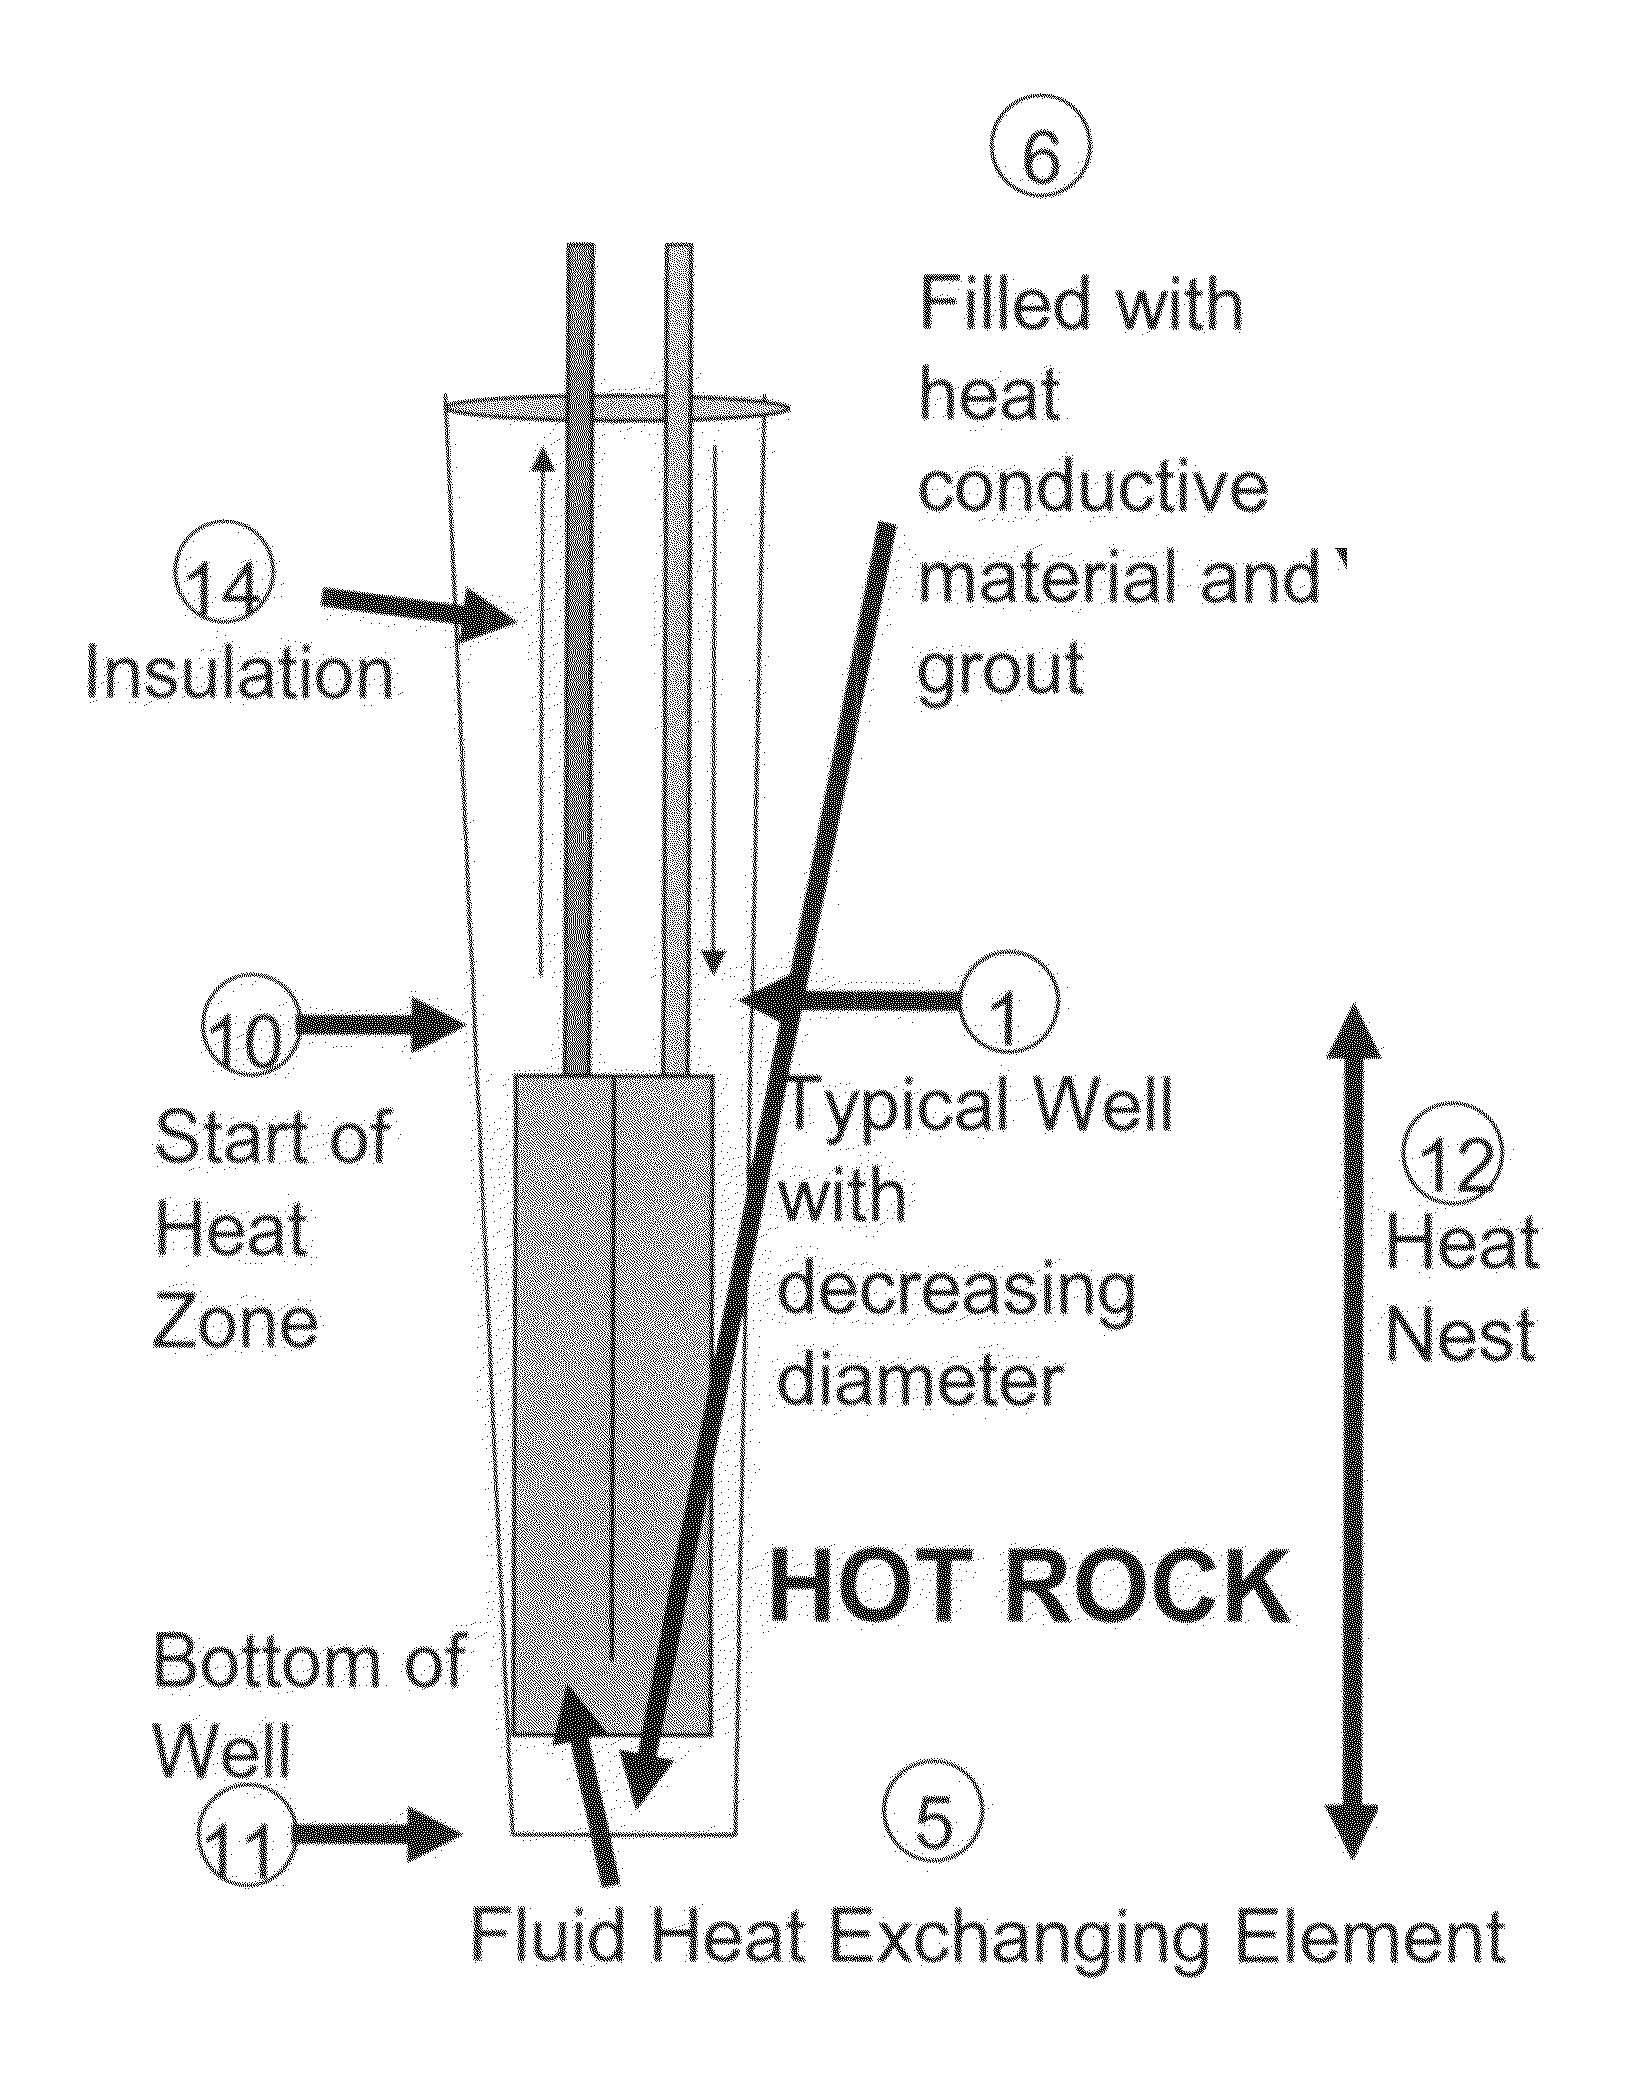 System and method of maximizing heat transfer at the bottom of a well using heat conductive components and a predictive model